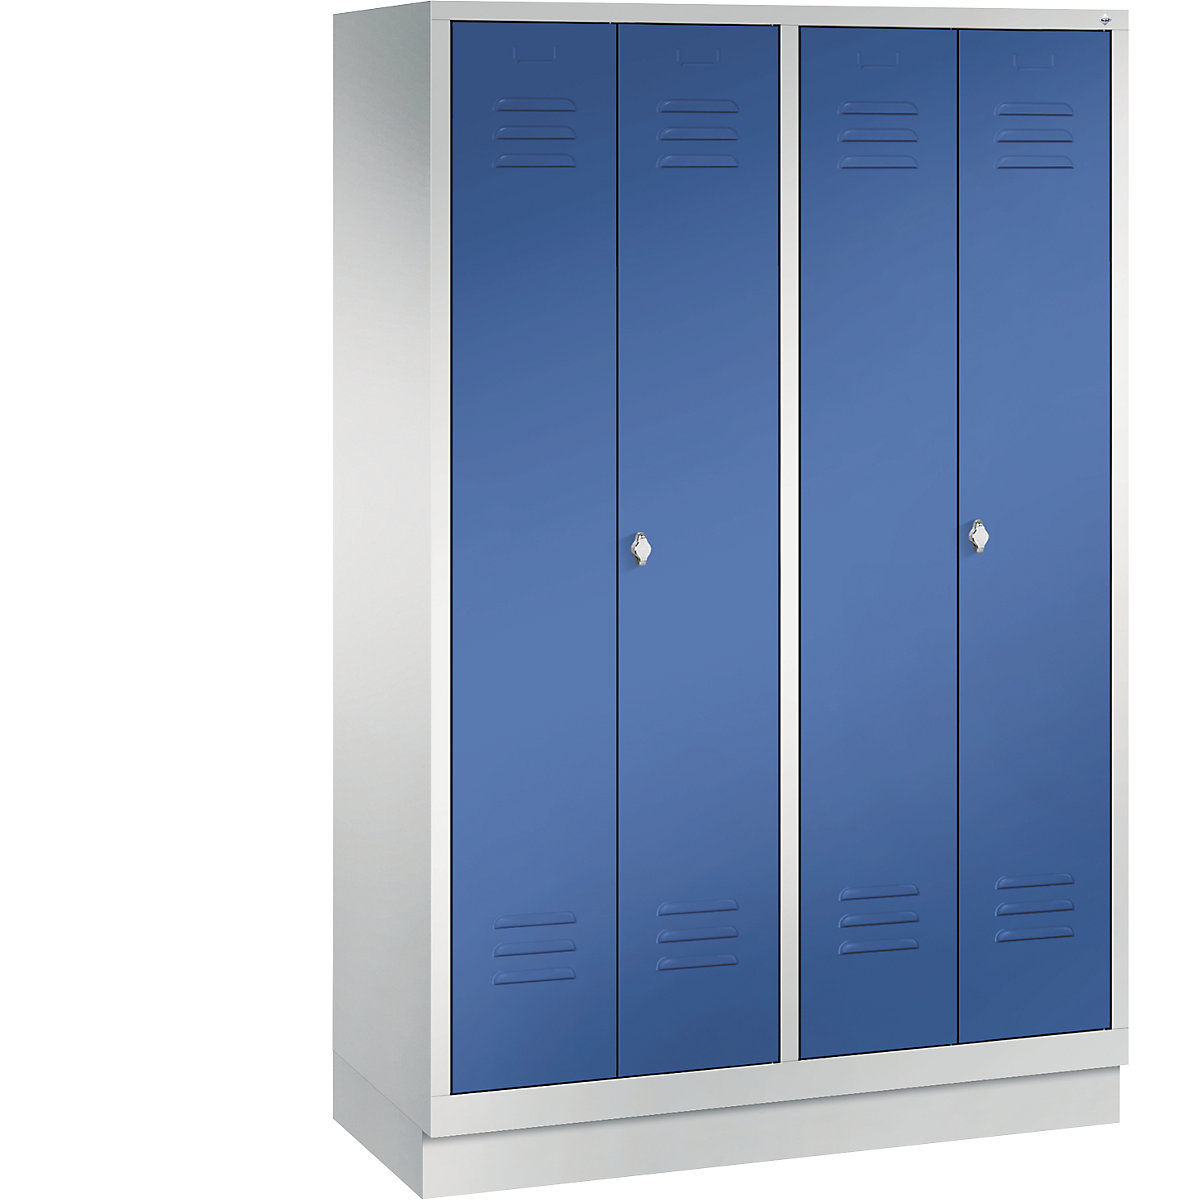 CLASSIC cloakroom locker with plinth, doors close in the middle – C+P, 4 compartments, compartment width 300 mm, light grey / gentian blue-8